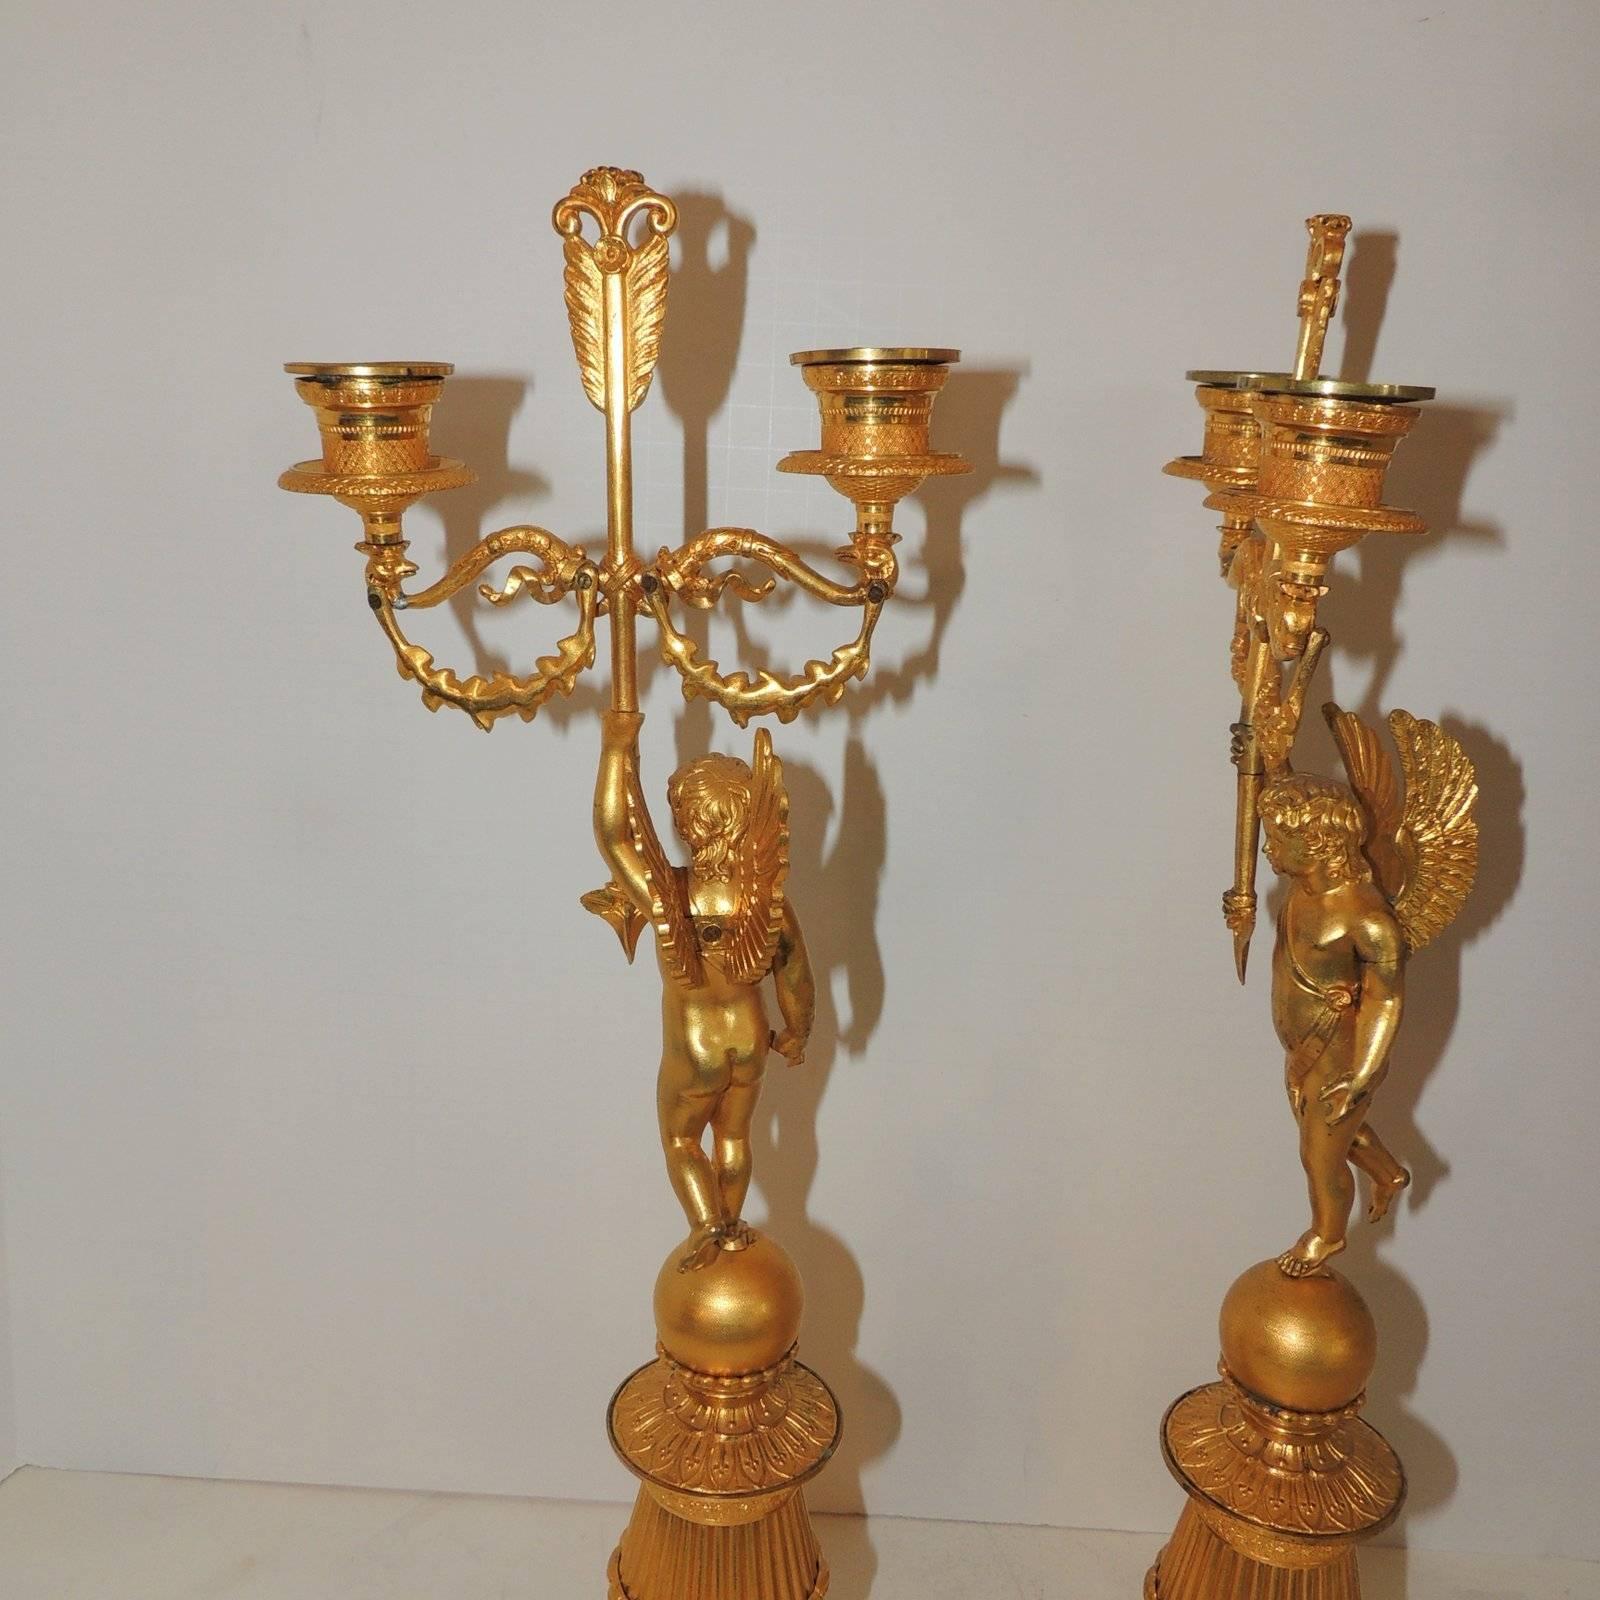 Early 20th Century Wonderful Pair Dore Bronze Two-Arm Winged Putti Cherub Neoclassical Candelabras For Sale